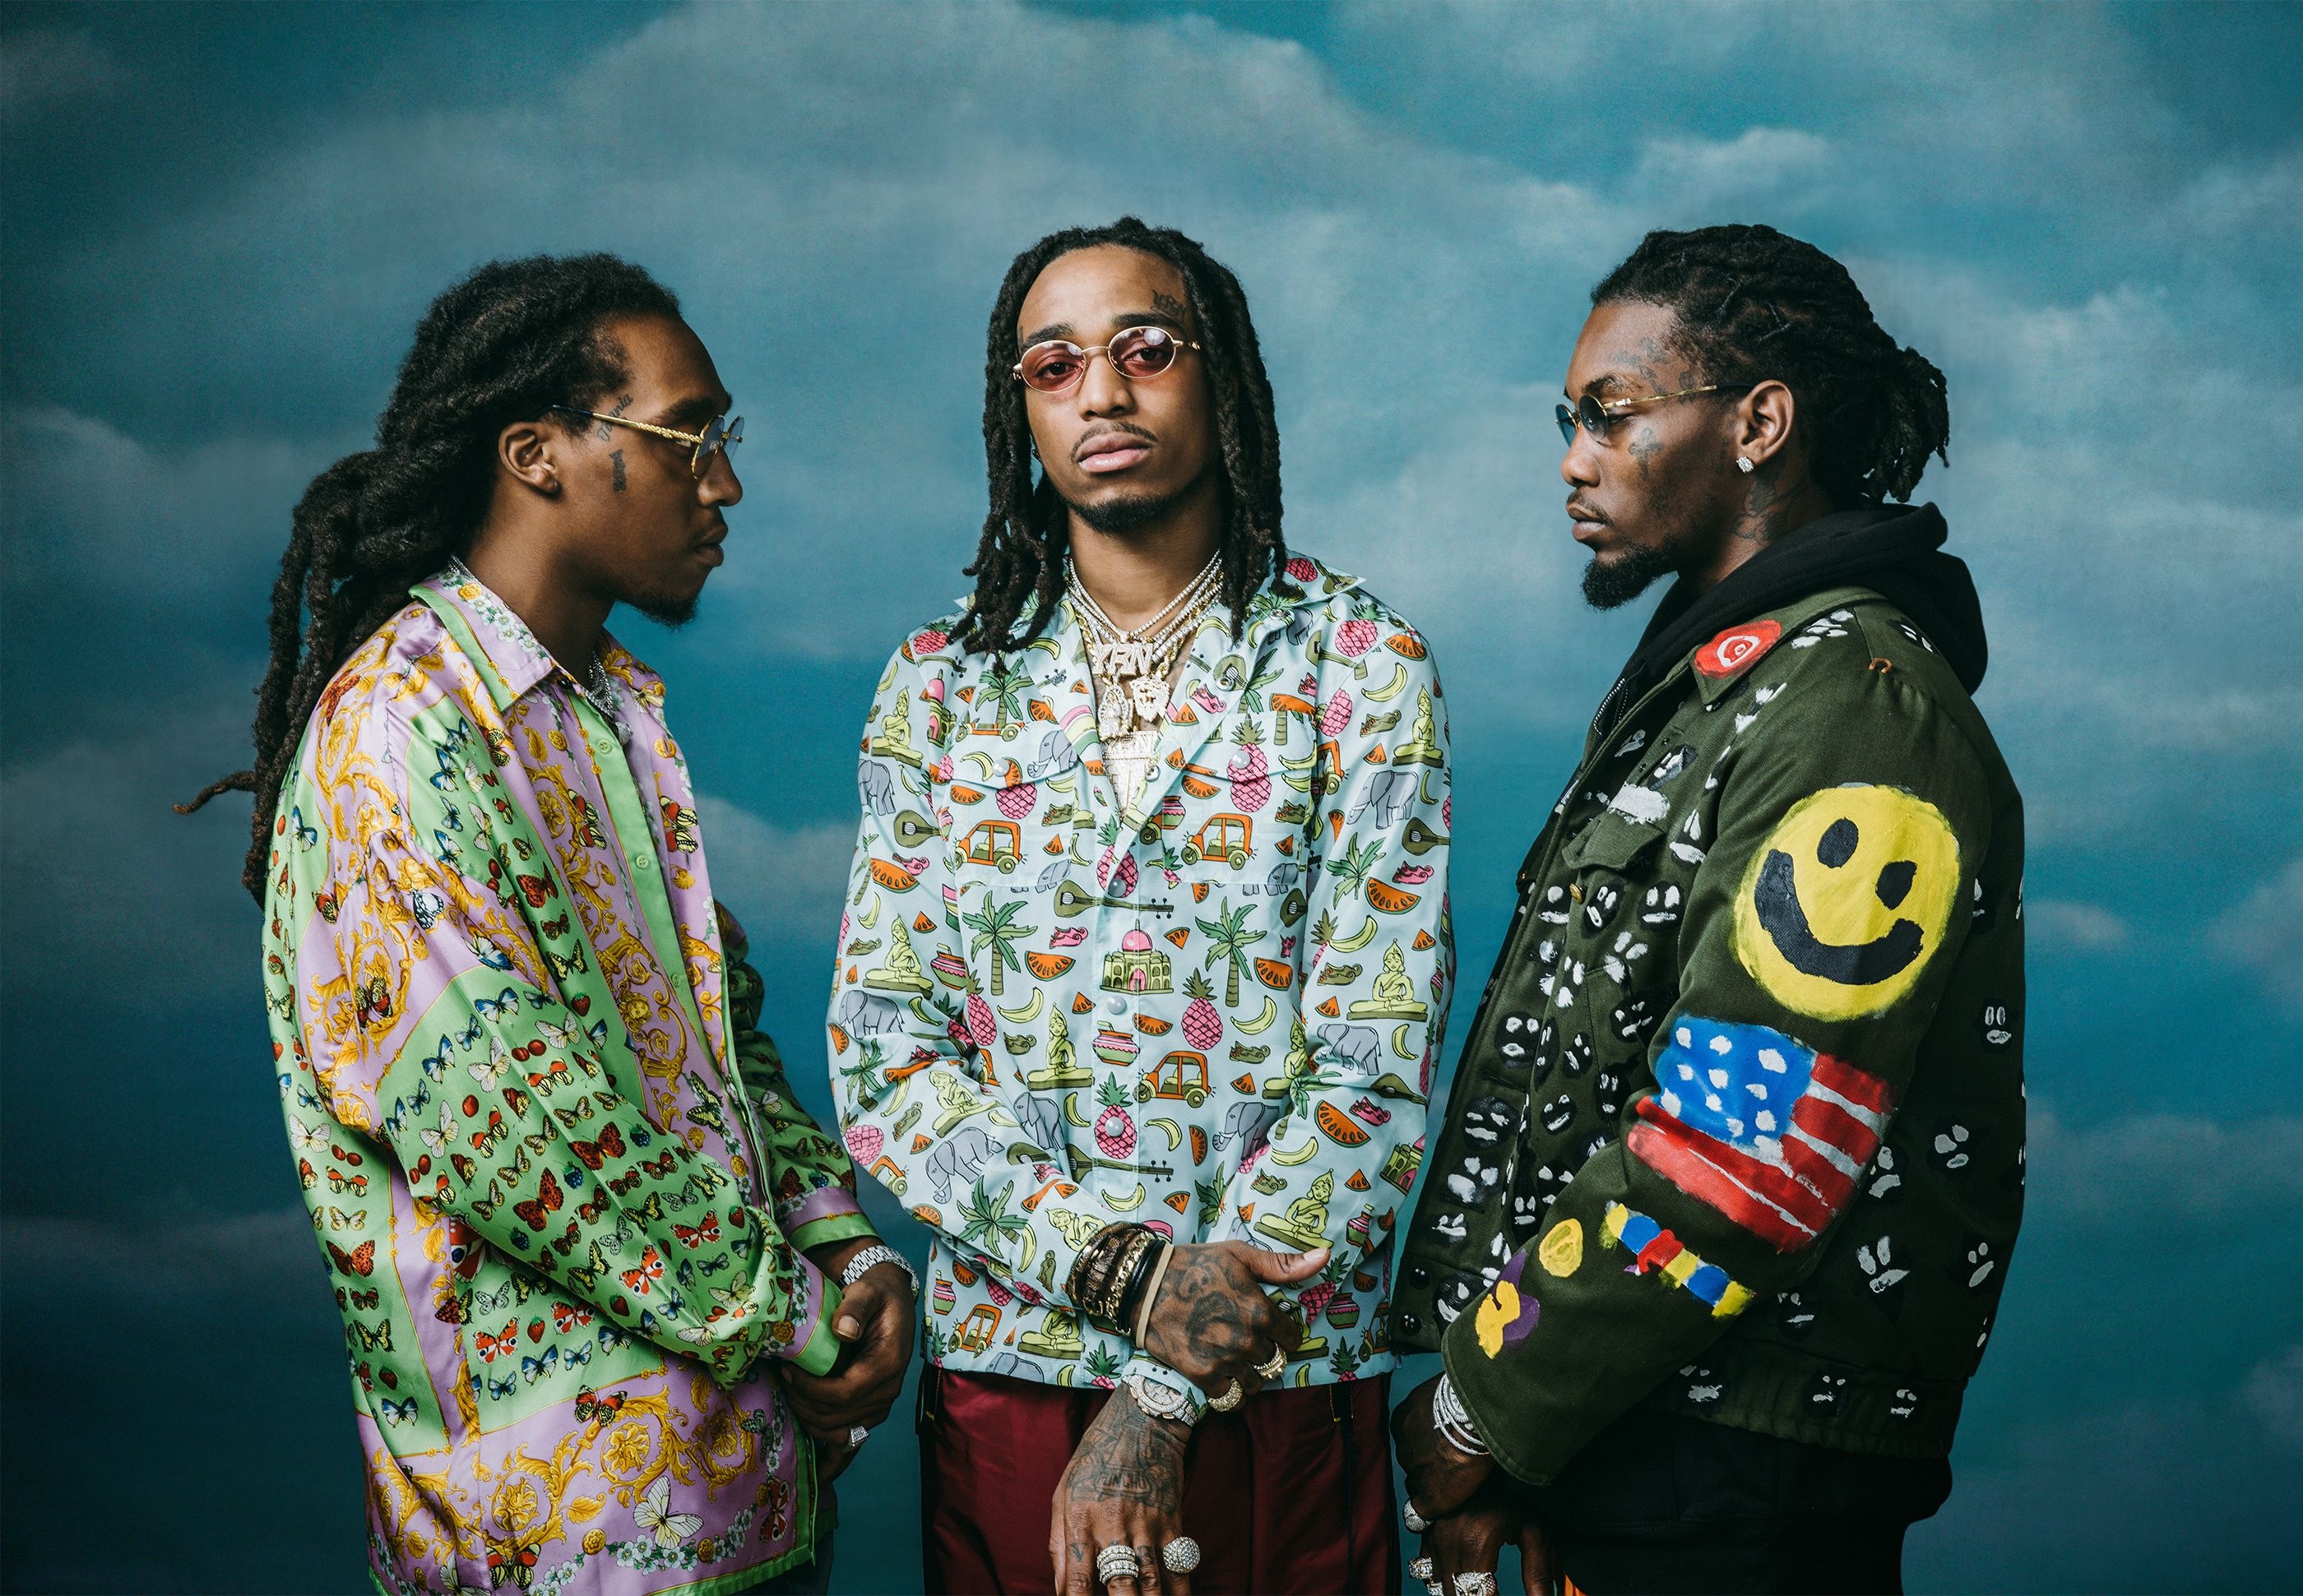 Migos Wallpapers - Top Free Migos Backgrounds 2800x1950